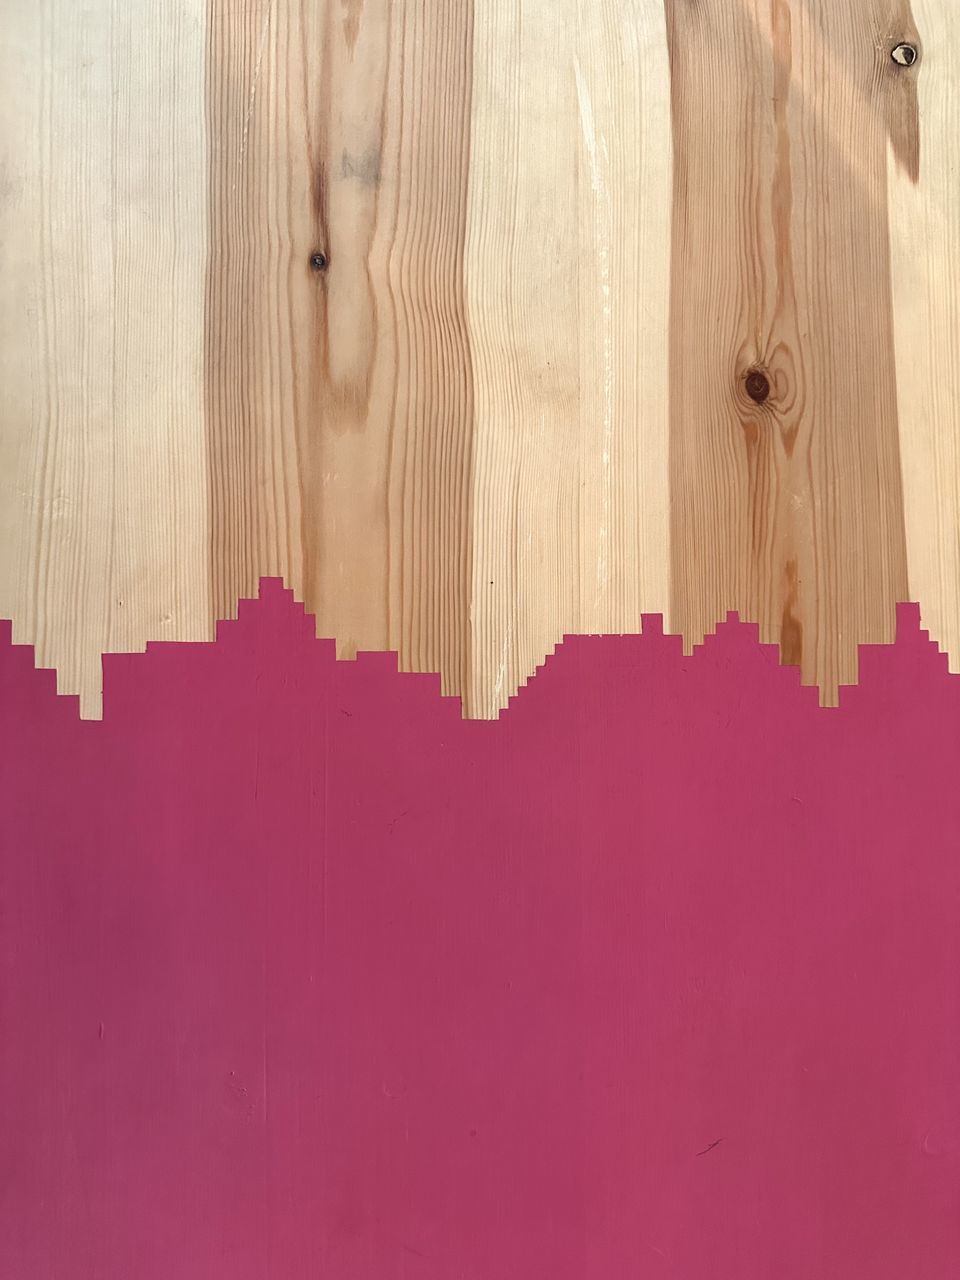 wood, pink, red, no people, backgrounds, flooring, floor, textured, pattern, wall - building feature, copy space, hardwood, indoors, wood flooring, laminate flooring, full frame, close-up, wood stain, architecture, plank, built structure